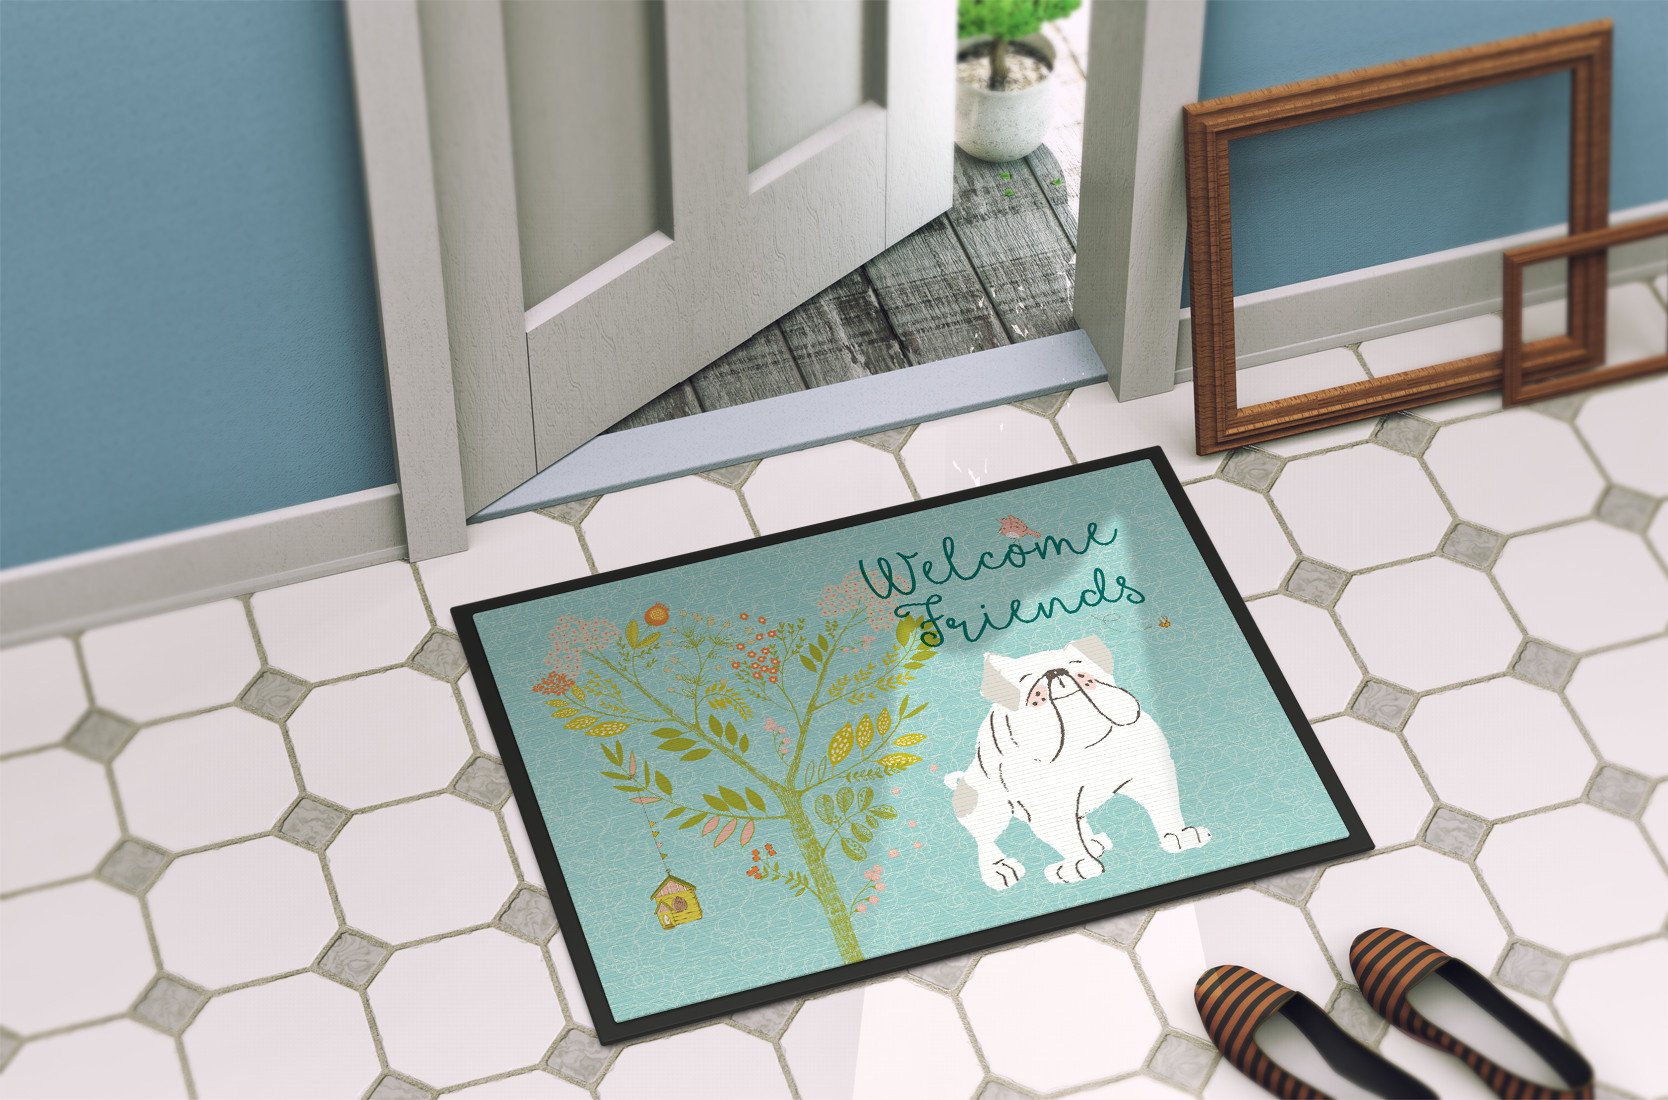 Welcome Friends English Bulldog White Indoor or Outdoor Mat 24x36 BB7603JMAT by Caroline's Treasures